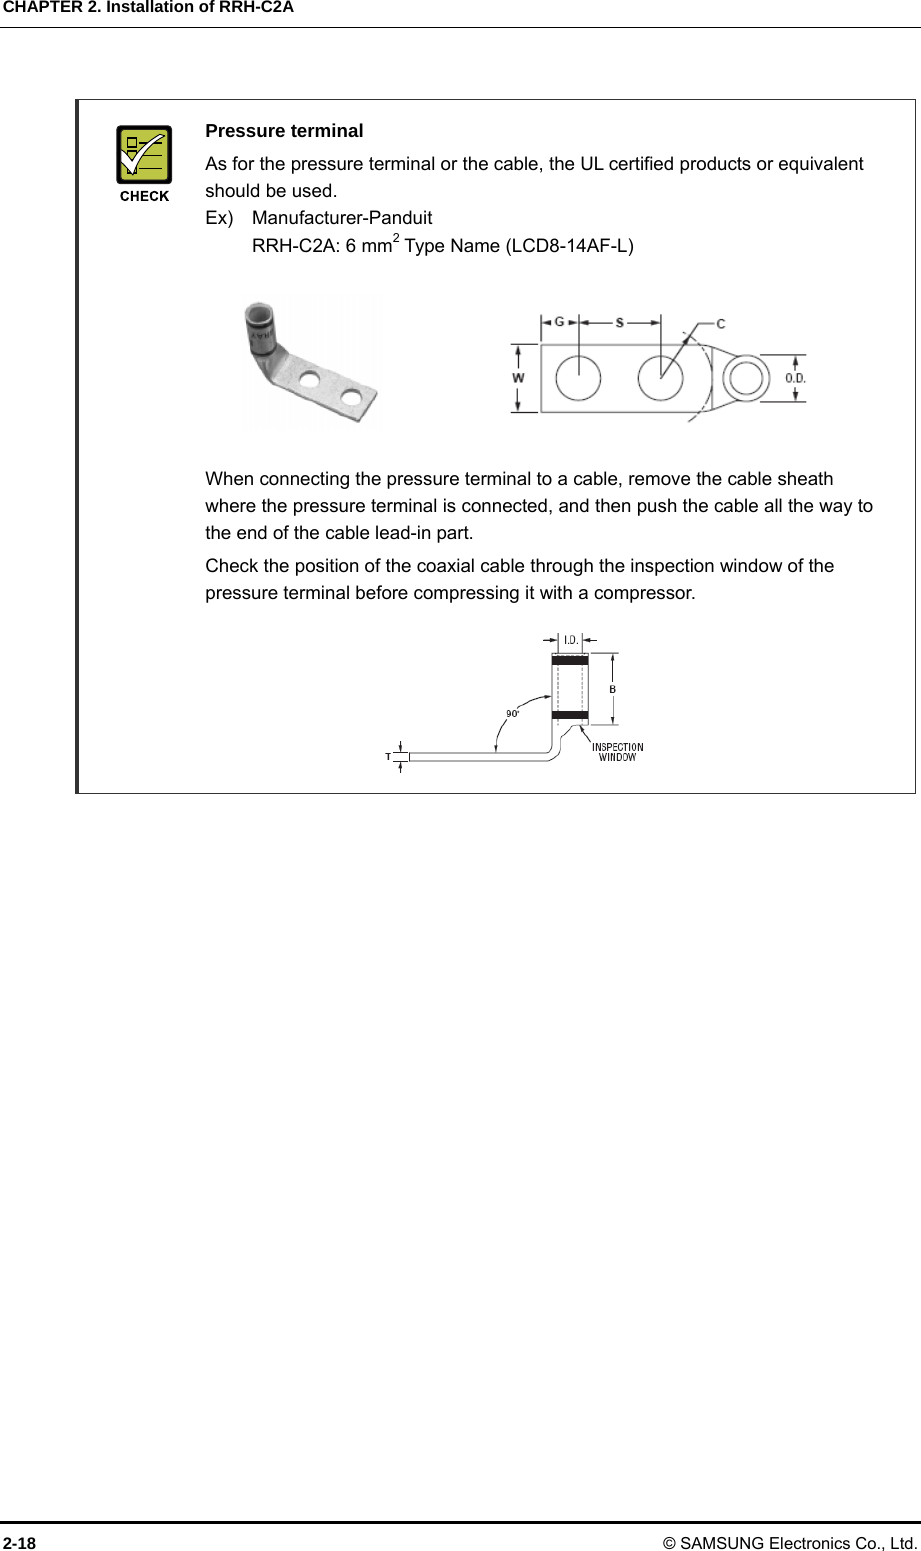 CHAPTER 2. Installation of RRH-C2A 2-18 © SAMSUNG Electronics Co., Ltd.   Pressure terminal   As for the pressure terminal or the cable, the UL certified products or equivalent should be used. Ex)  Manufacturer-Panduit   RRH-C2A: 6 mm2 Type Name (LCD8-14AF-L)         When connecting the pressure terminal to a cable, remove the cable sheath where the pressure terminal is connected, and then push the cable all the way to the end of the cable lead-in part.   Check the position of the coaxial cable through the inspection window of the pressure terminal before compressing it with a compressor.       